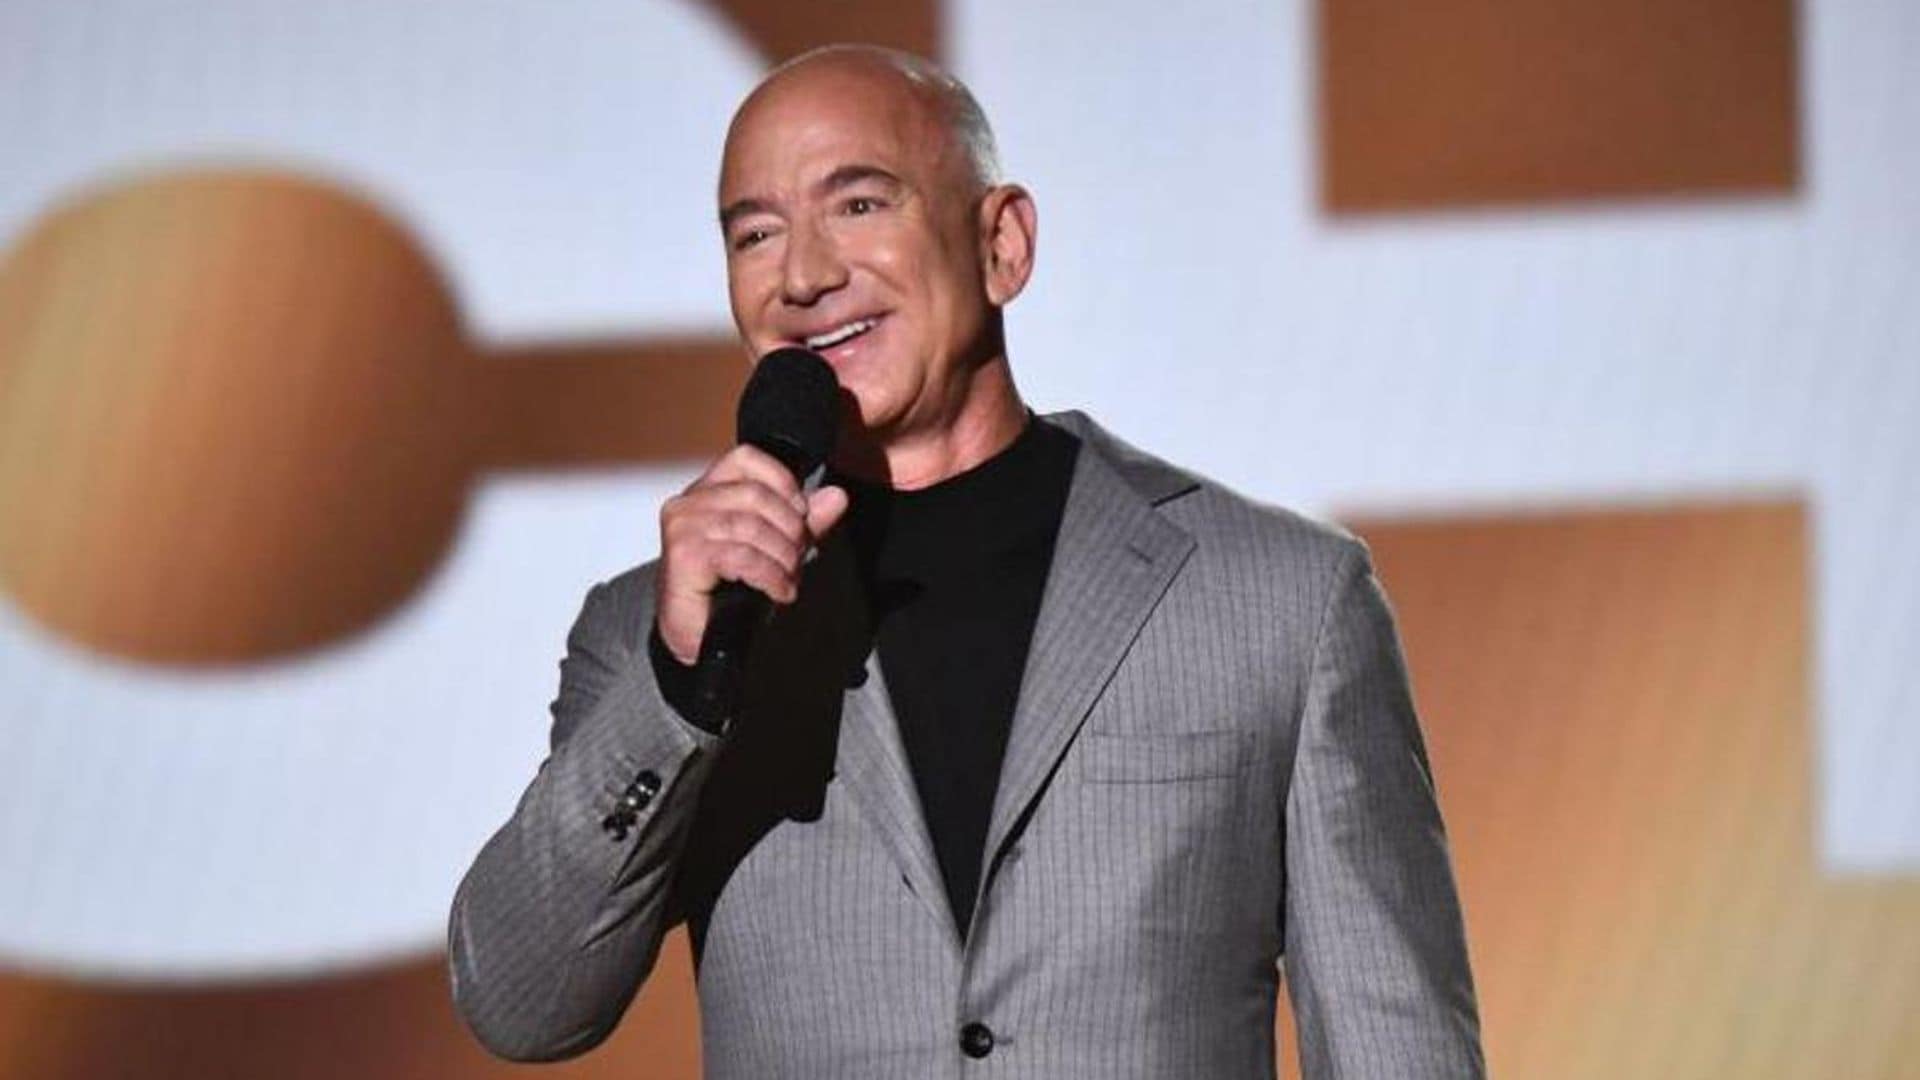 Jeff Bezos’ 5 tips for running your business